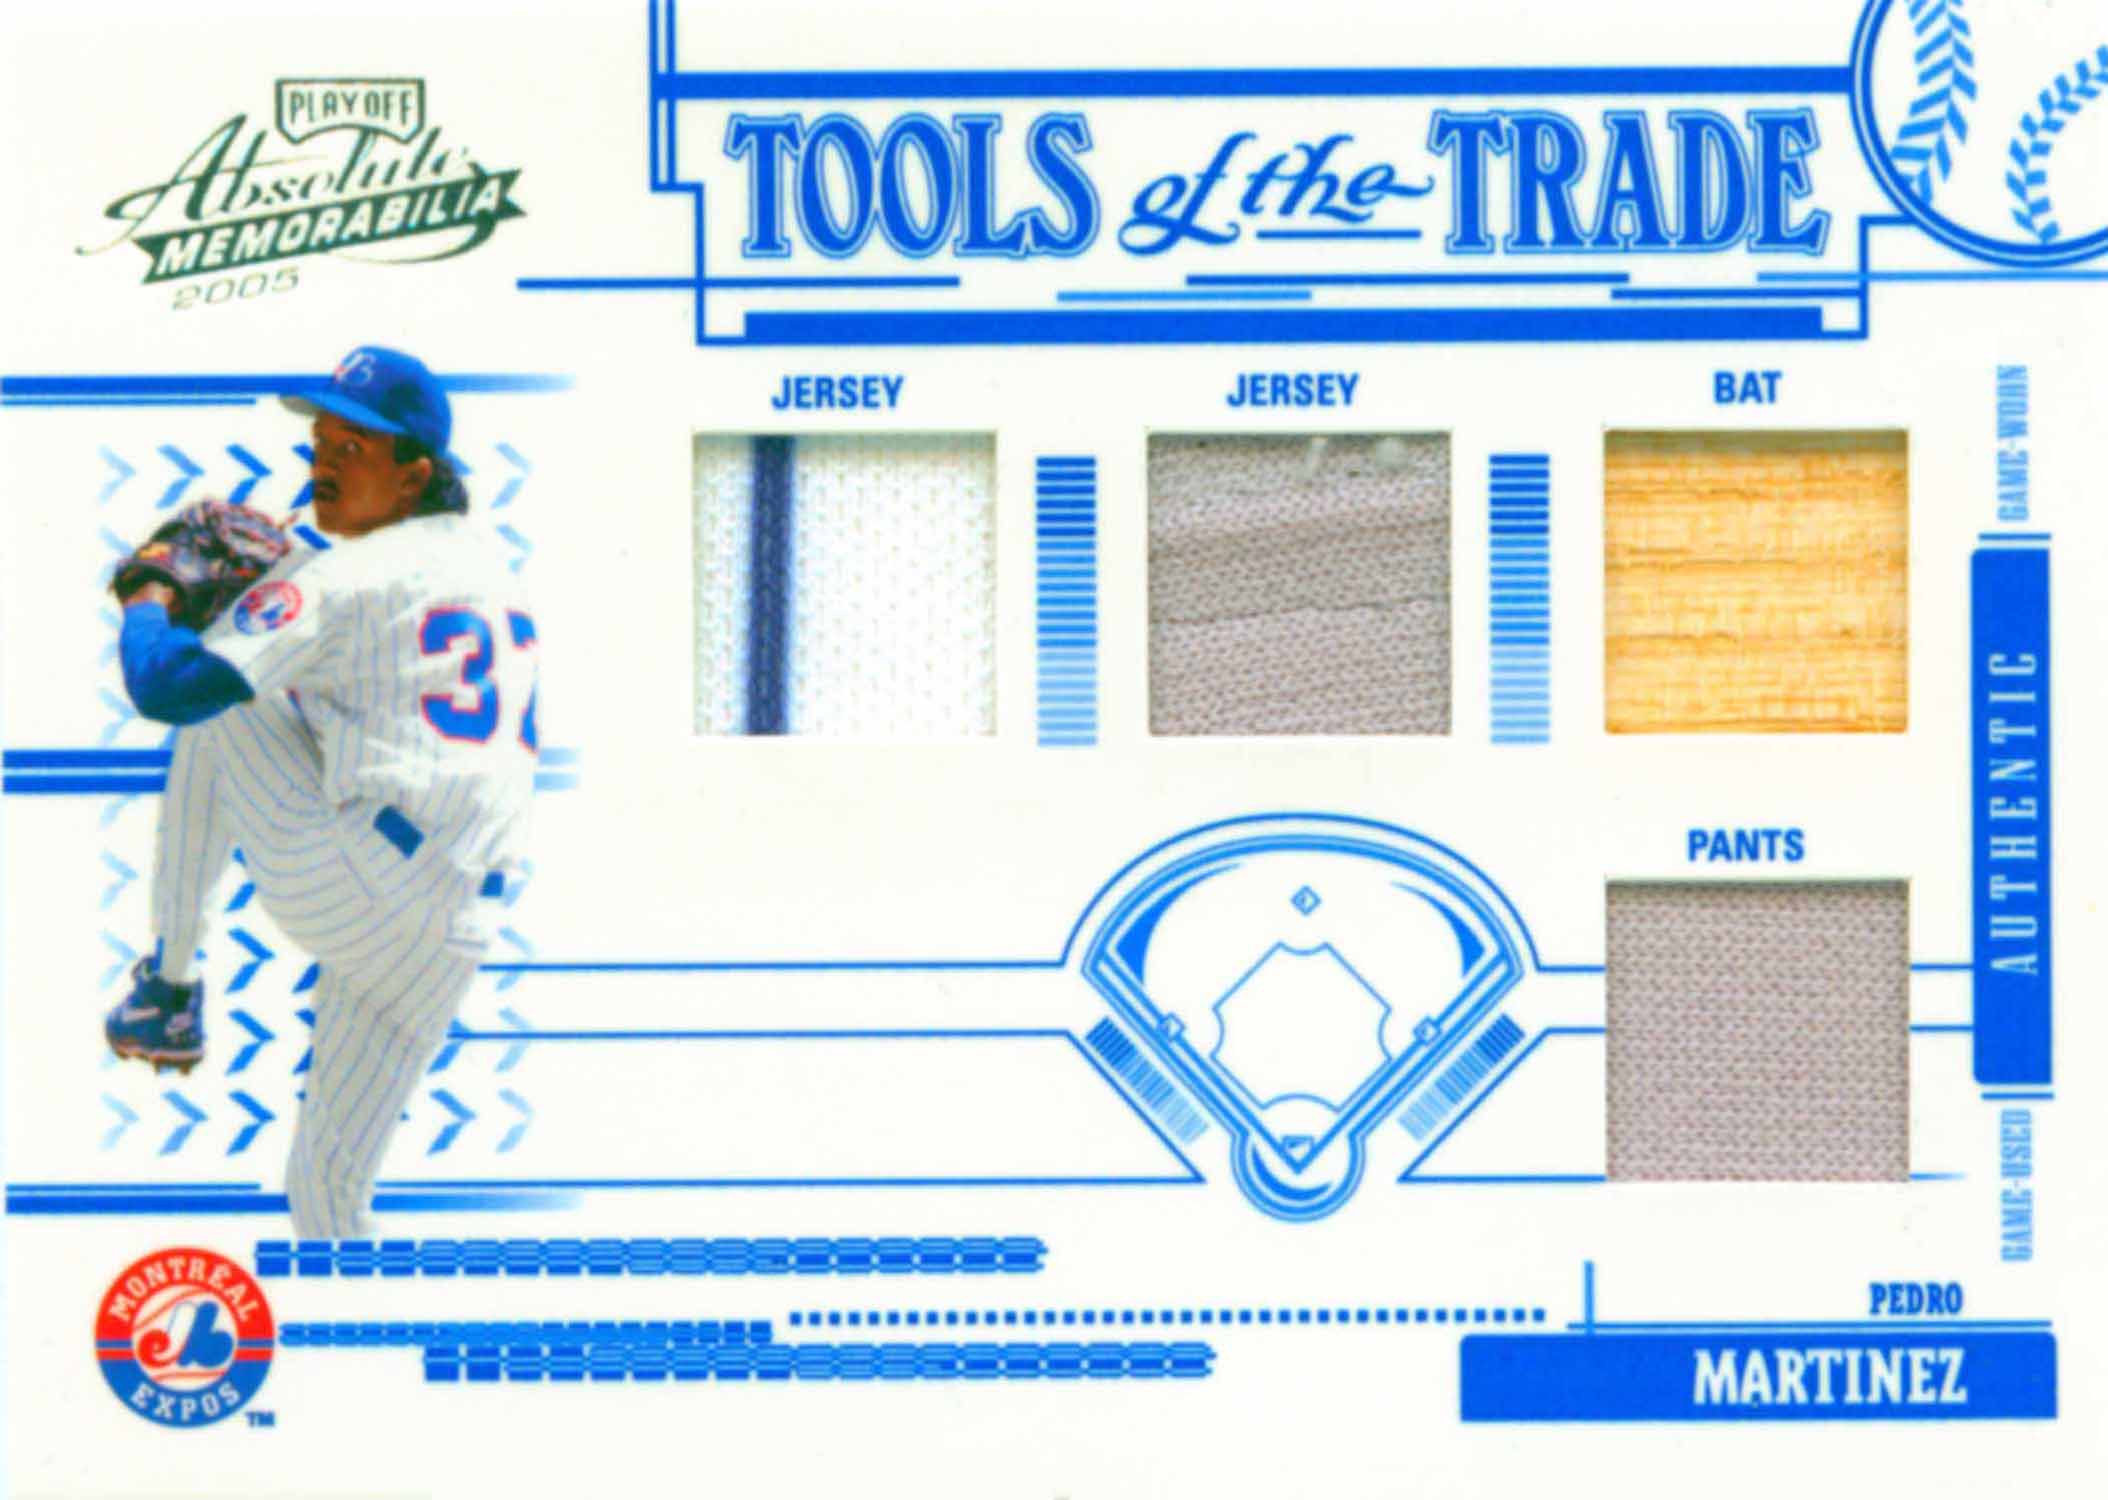 2005 Absolute Memorabilia Tools of the Trade Swatch Quad Bat-Jersey-Jersey-Pants